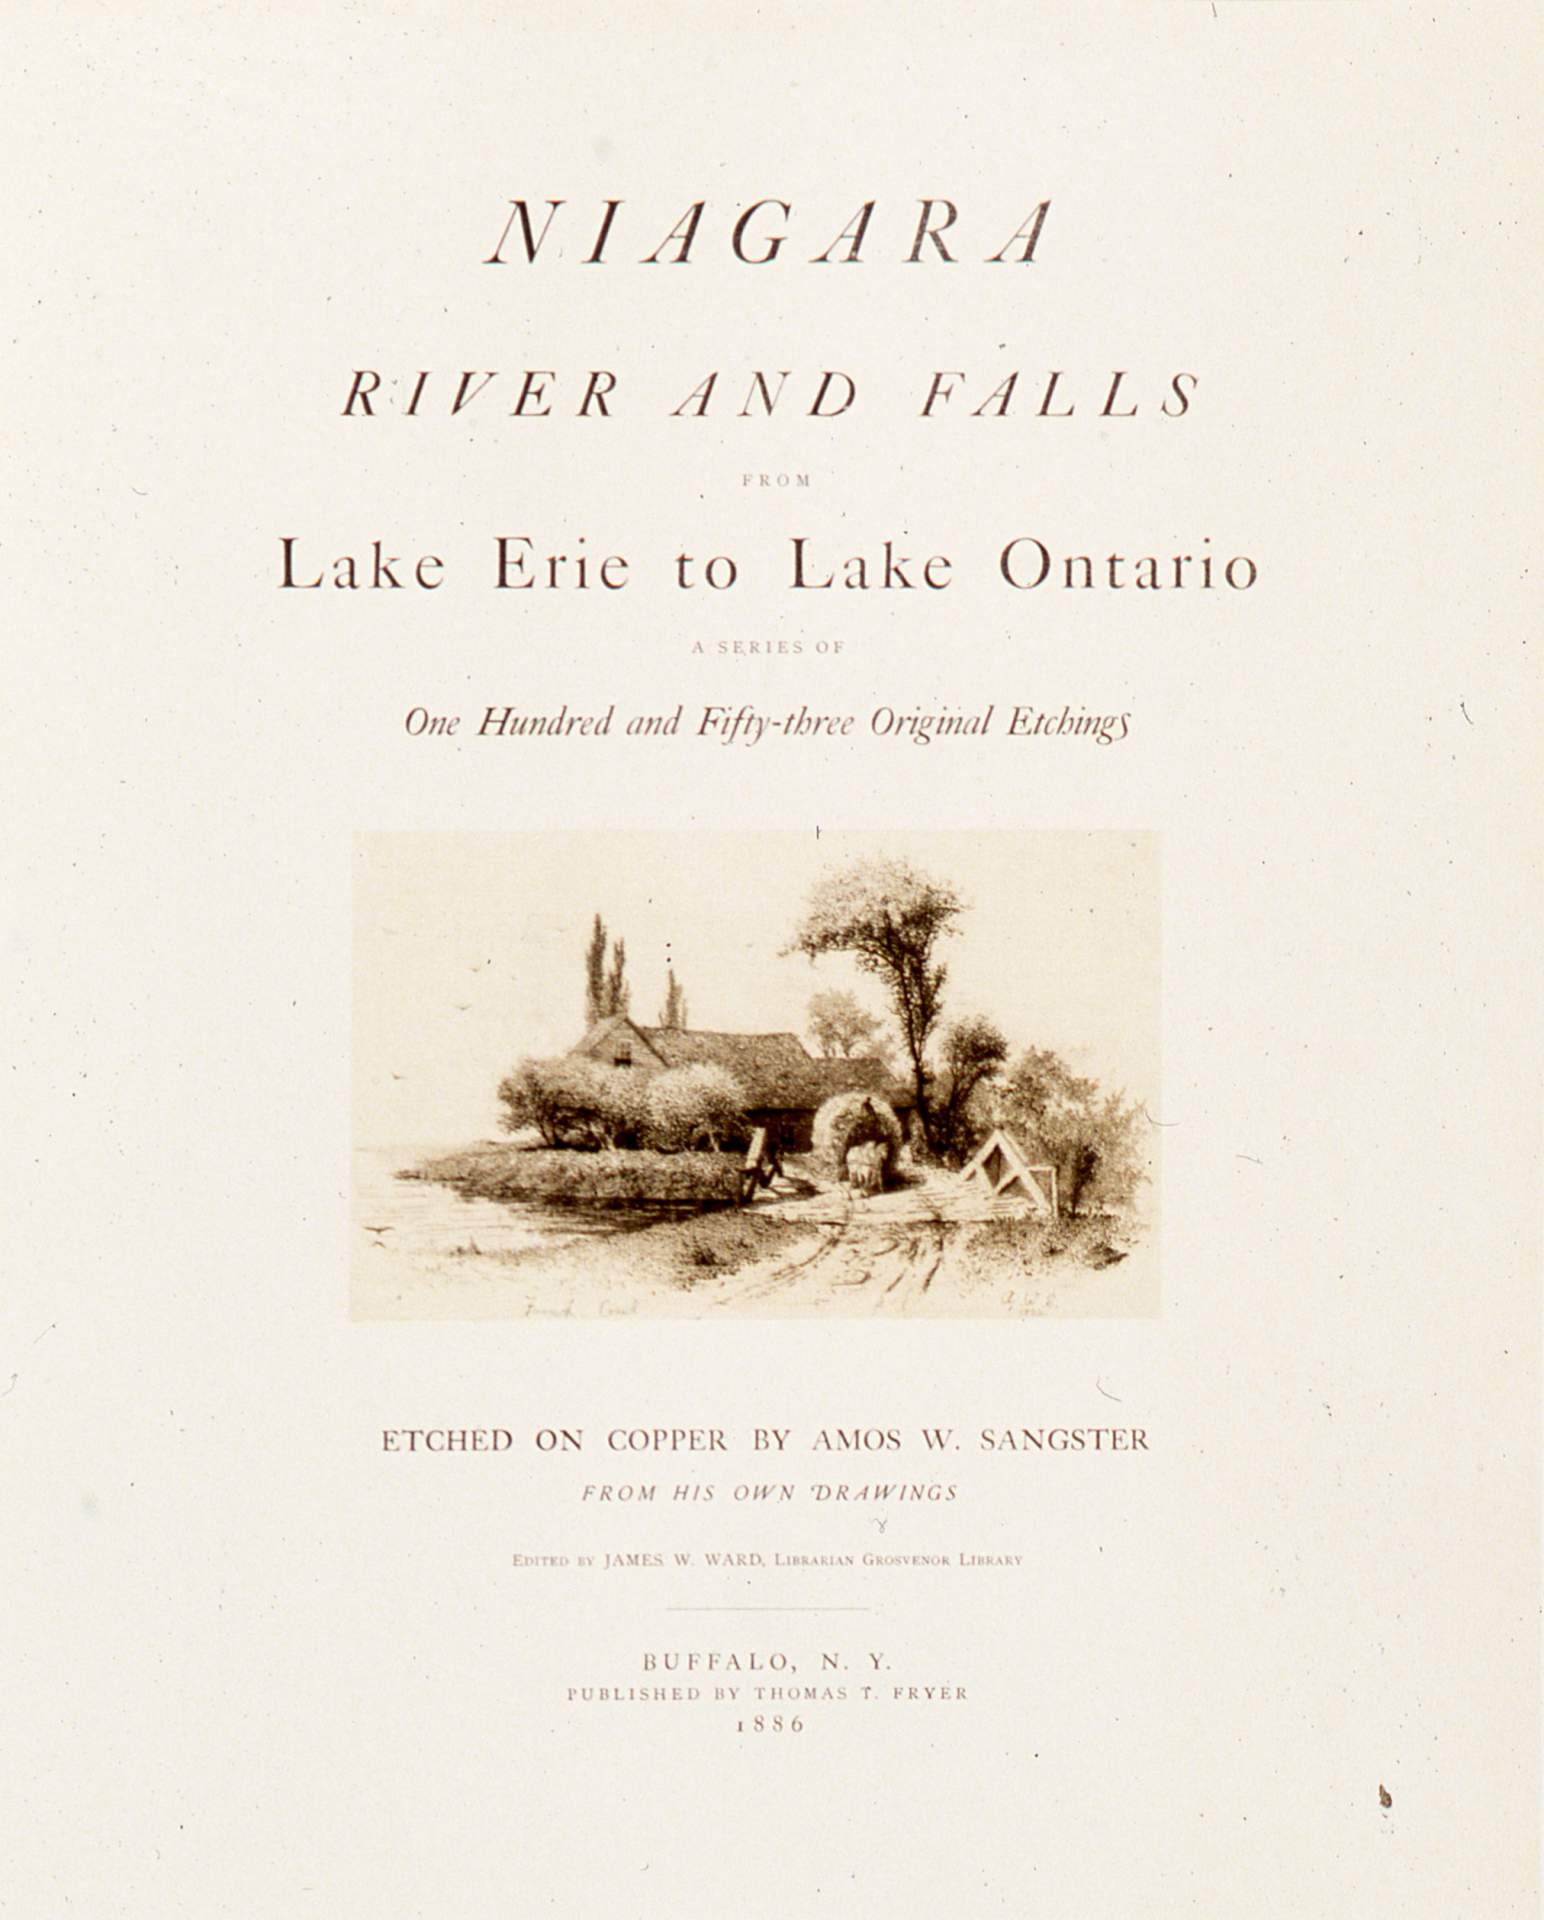 Niagara River and Falls from Lake Erie to Ontario, a Series of 153 Original Etchings By Amos W. Sangster [Title Page]